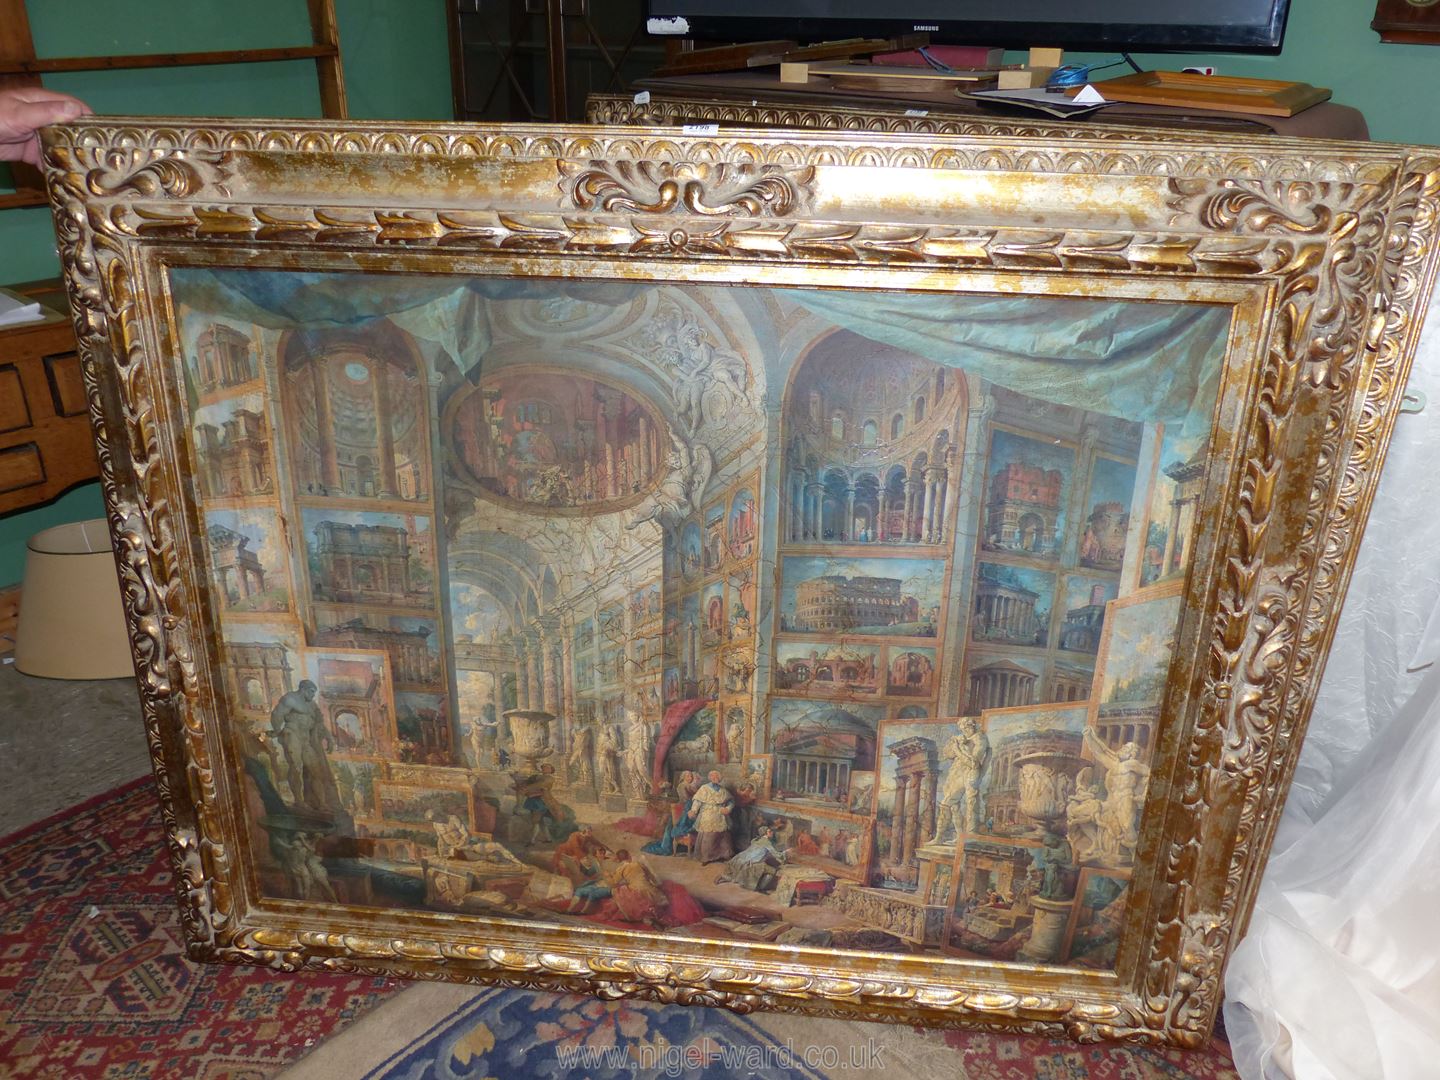 A very large ornate gilt framed Print on board by Giovanni Paolo Panini titled 'Ancient Rome',